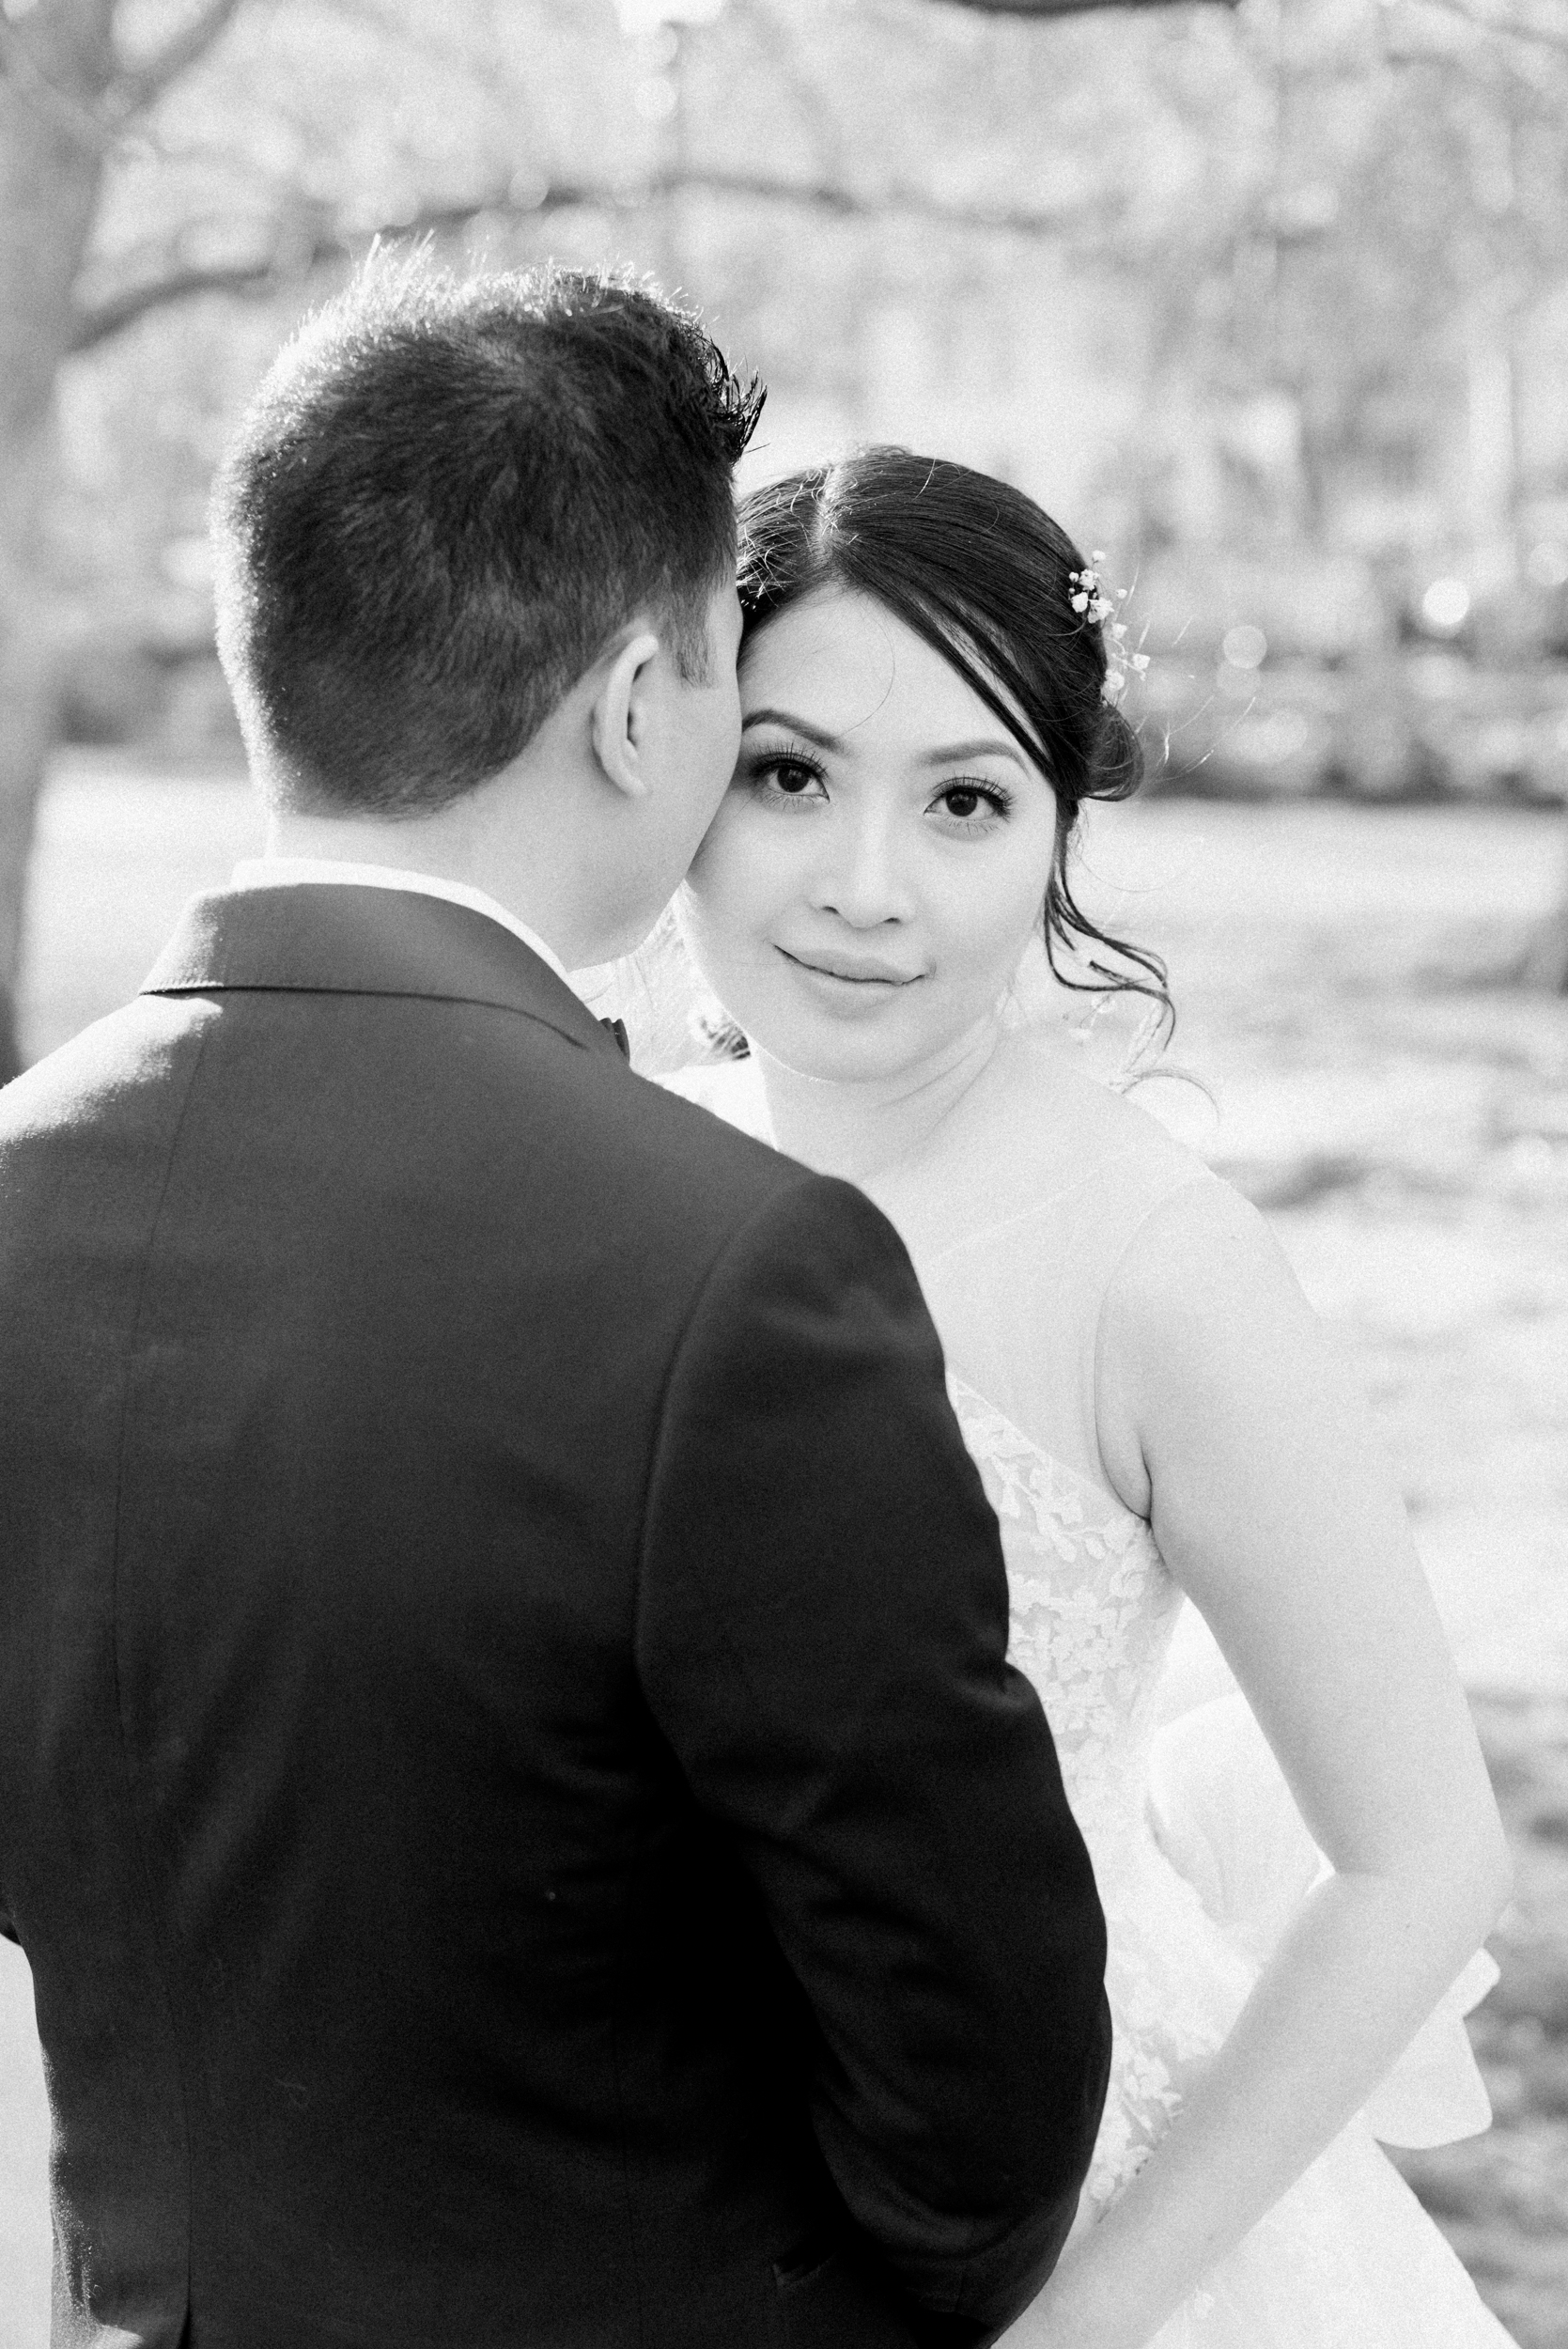 Bride and Groom Portraits at the Public Garden in Boston